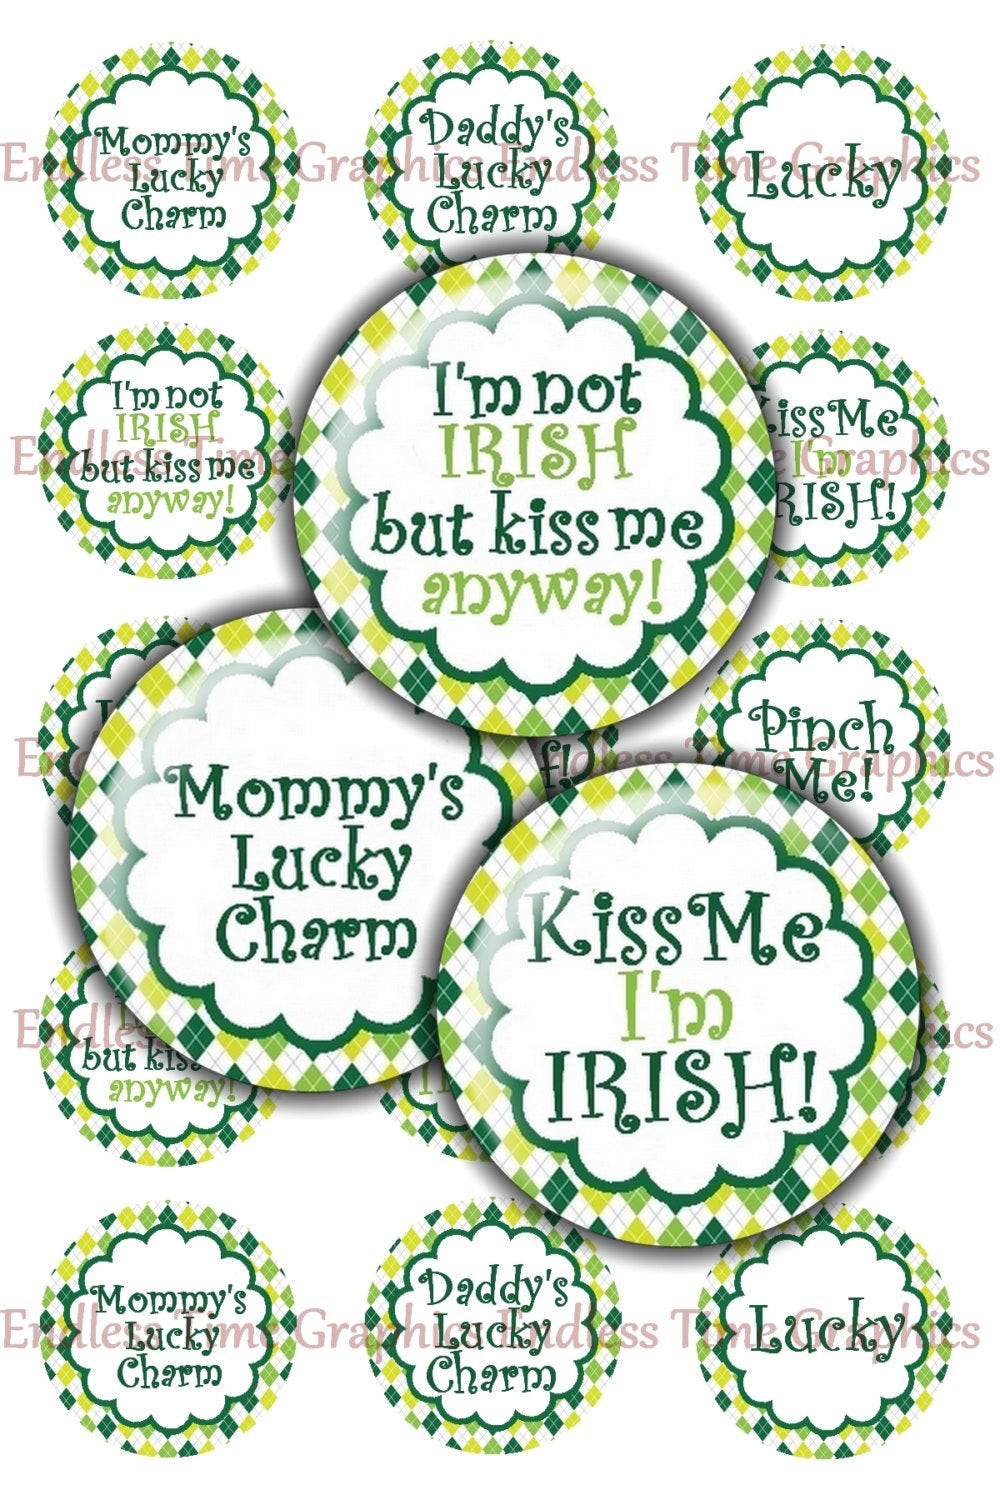 Cute St Patrick Day Quotes
 St Patricks Day Digital Bottle Cap Cute Sayings